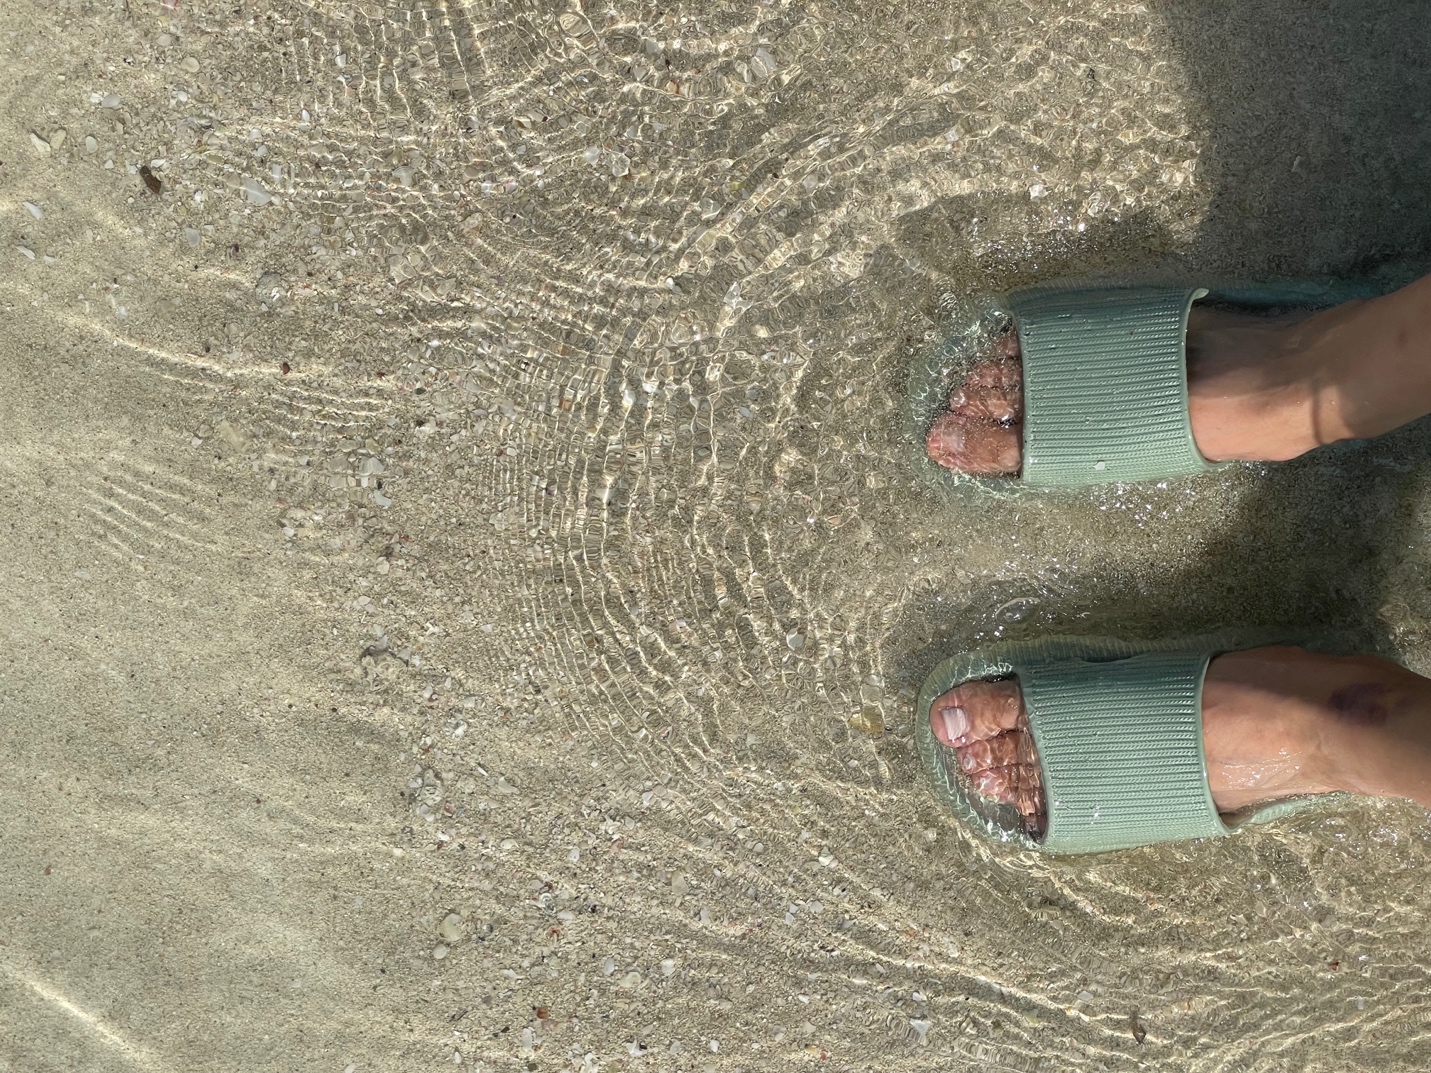 A person's feet in the sand Description automatically generated with low confidence